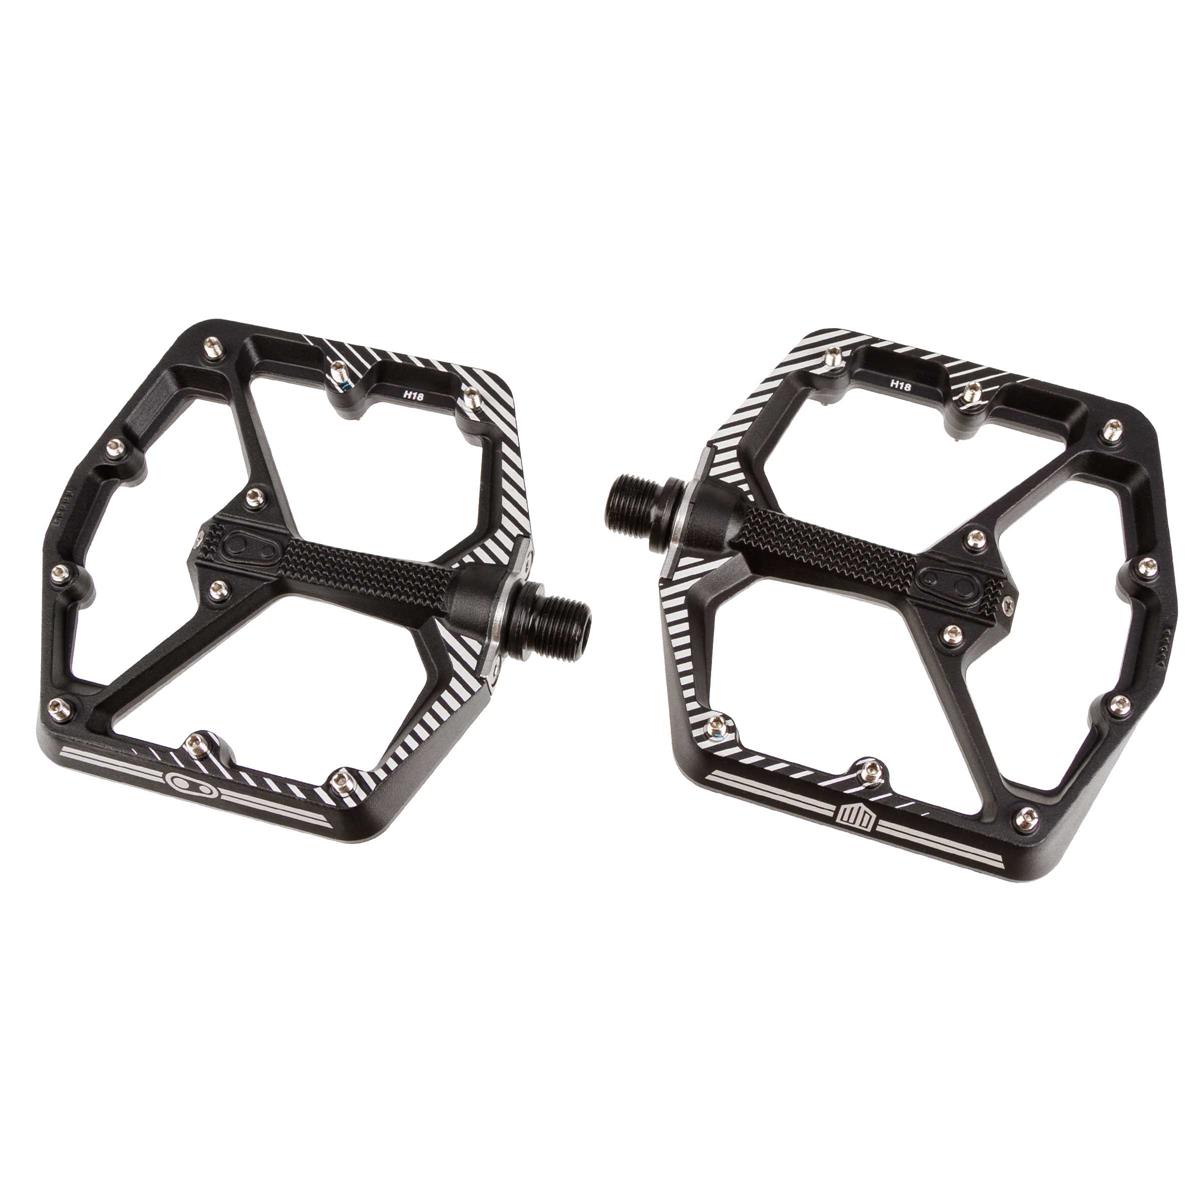 crank brothers stamp 7 flat pedals